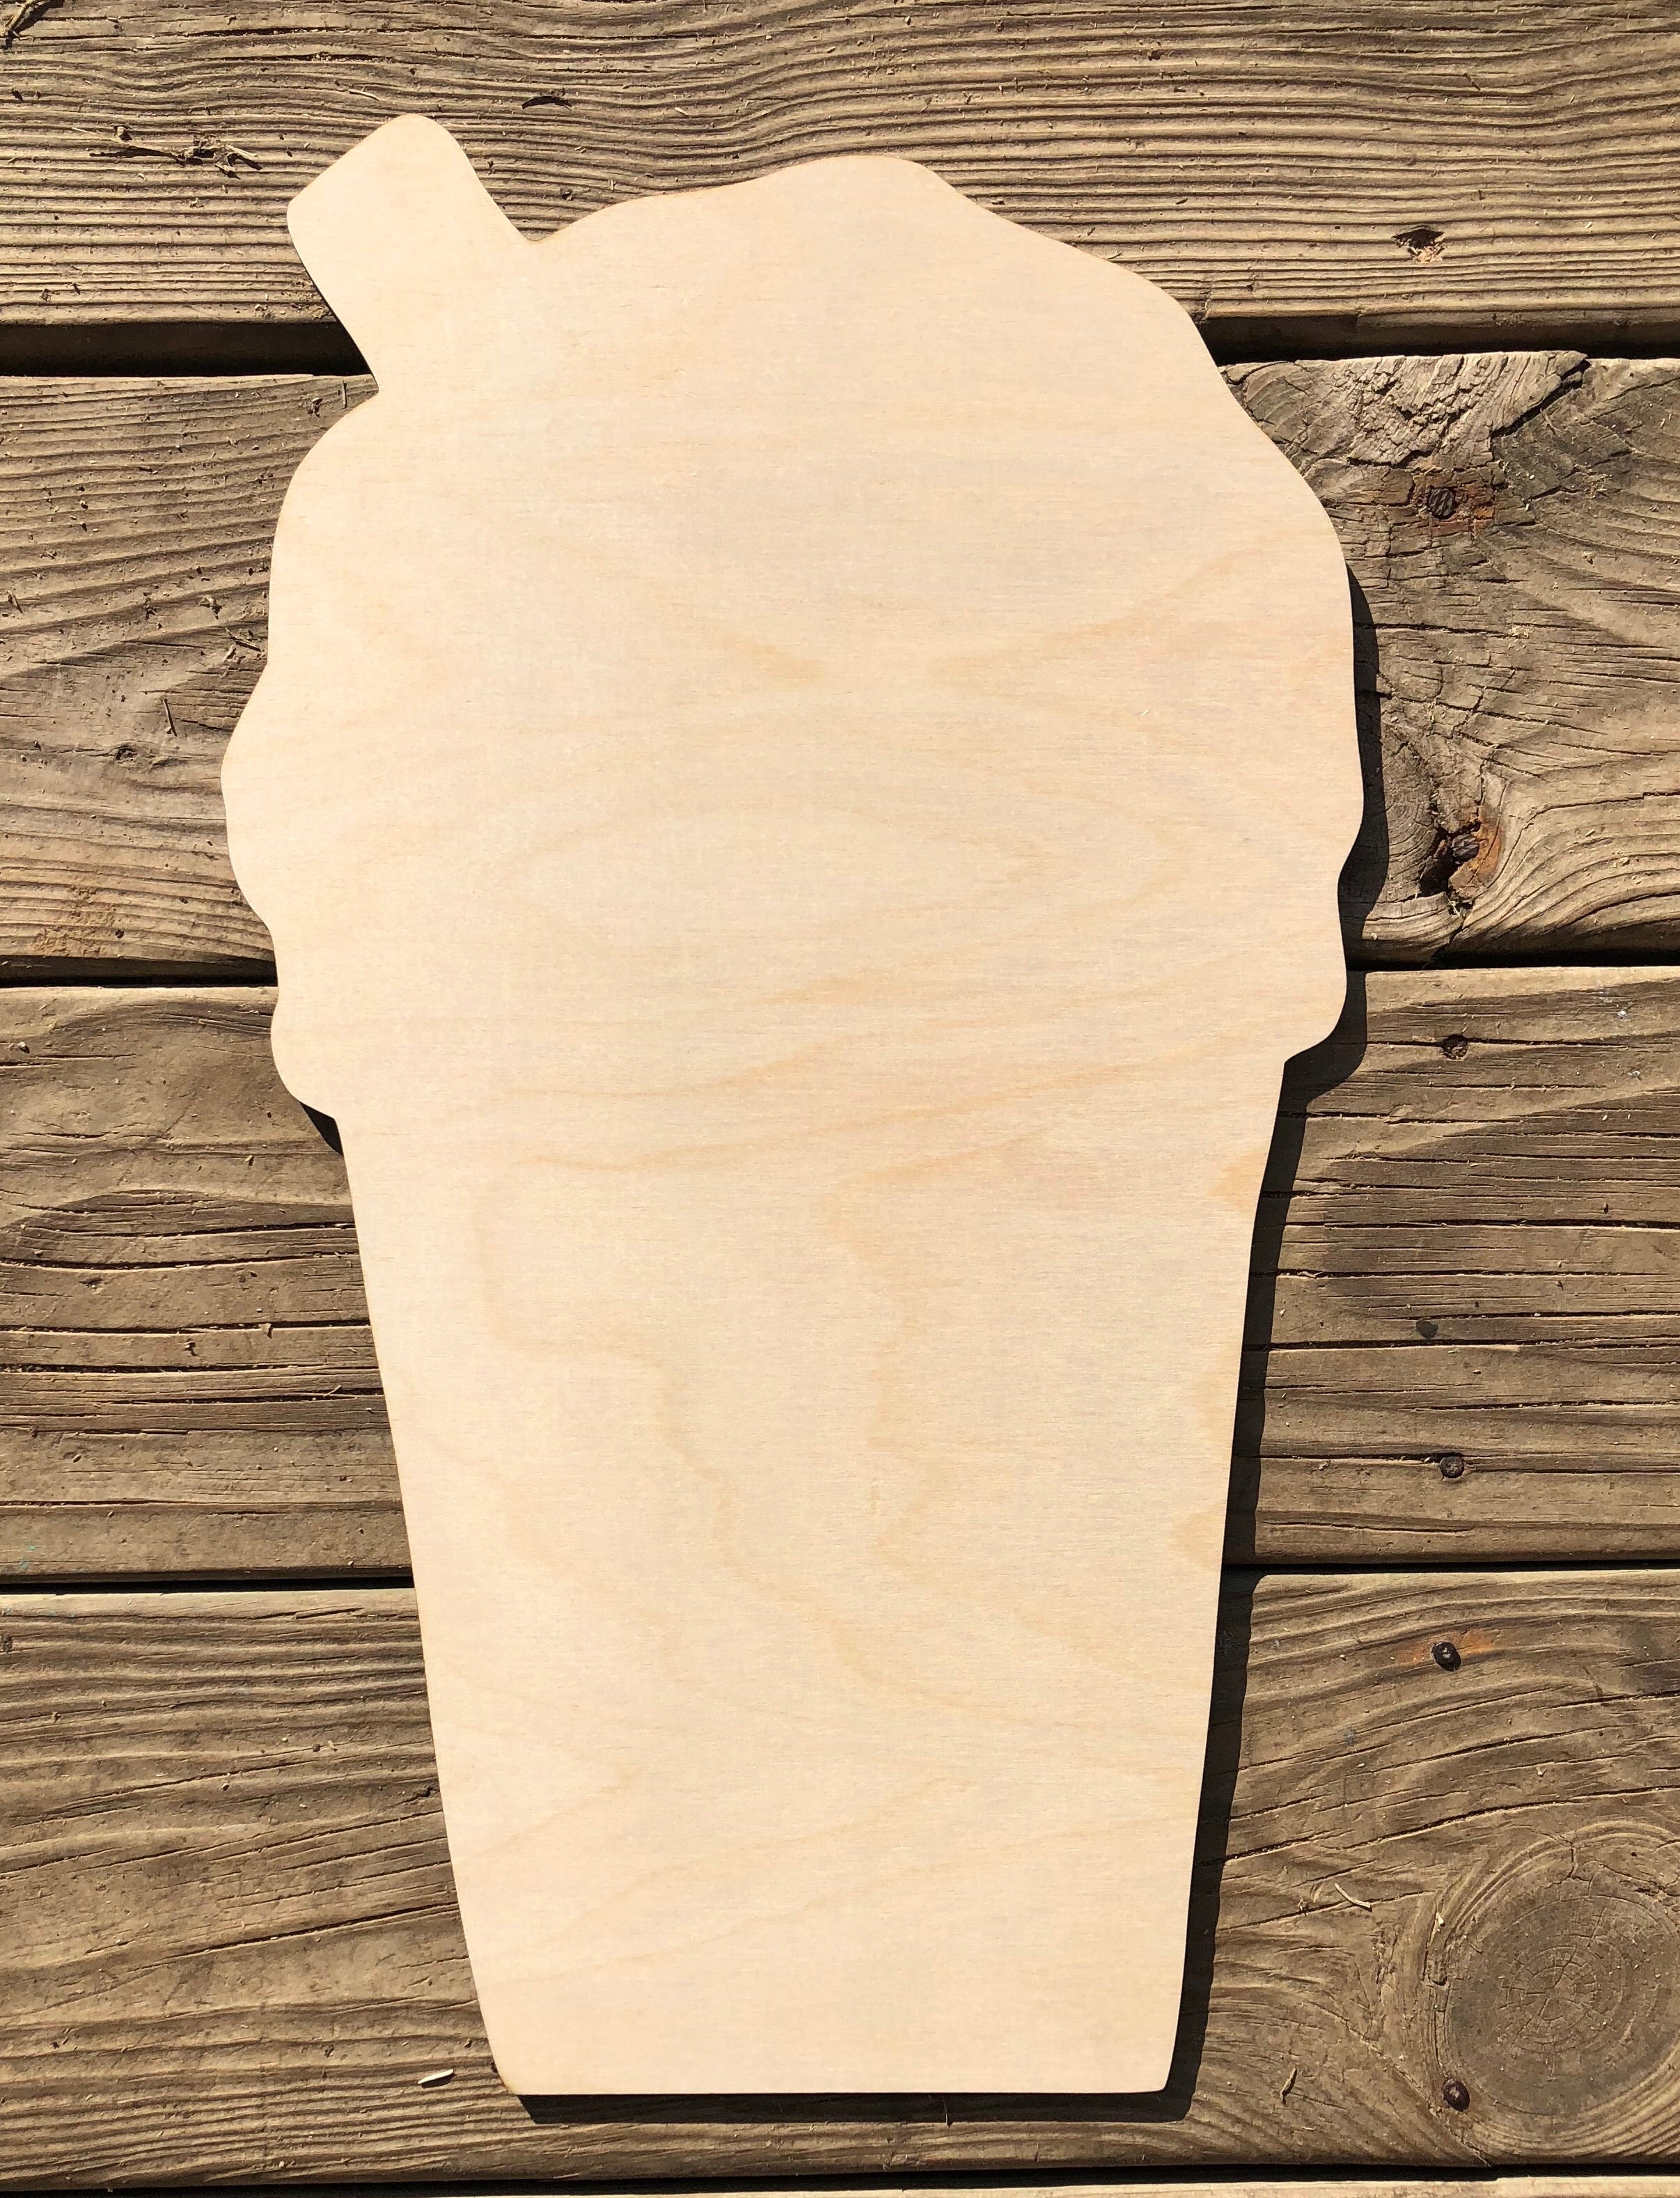 Download 18 New Orleans Style Snowball With Straw Door Hanger Wood Cutout